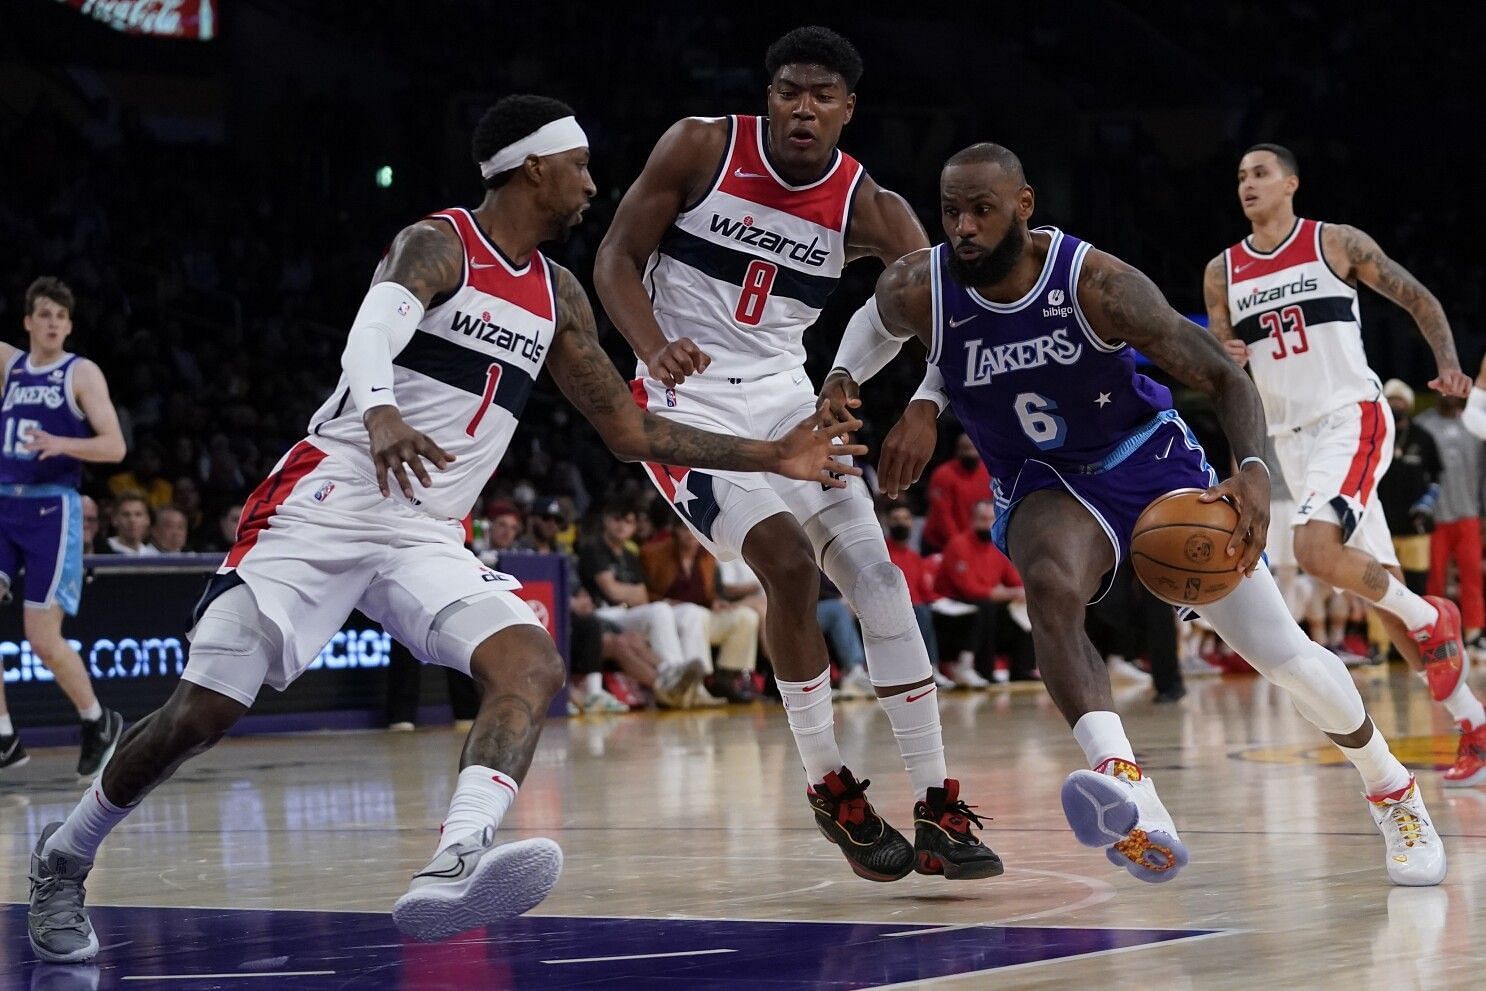 LeBron James erupted for 50 points the last time the LA Lakers battled the Washington Wizards. [Photo: Los Angeles Times]